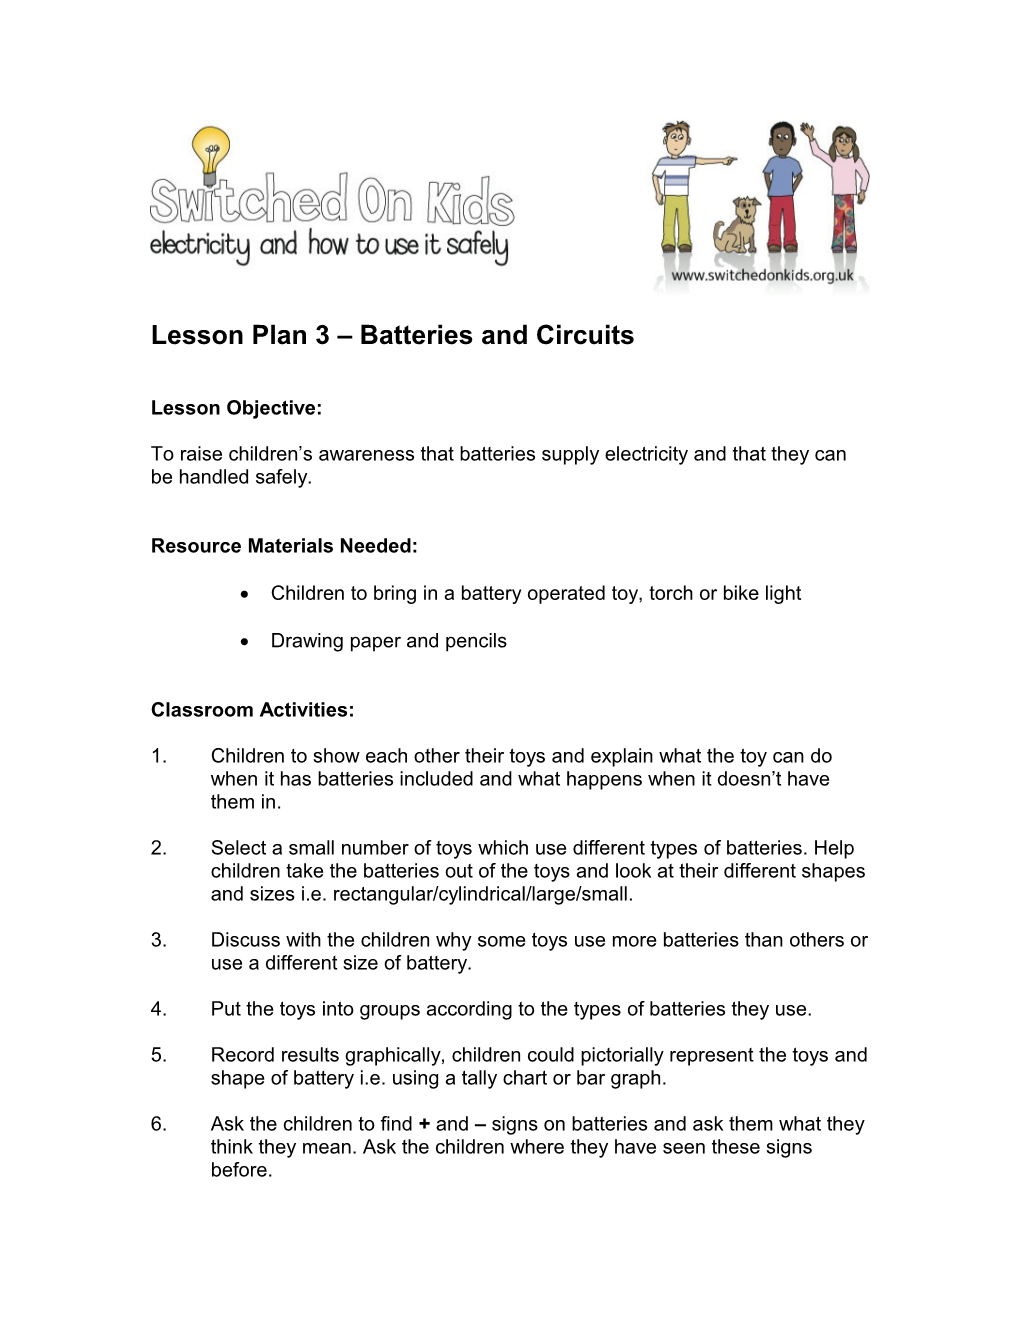 Lesson Plan 3 Batteries and Circuits